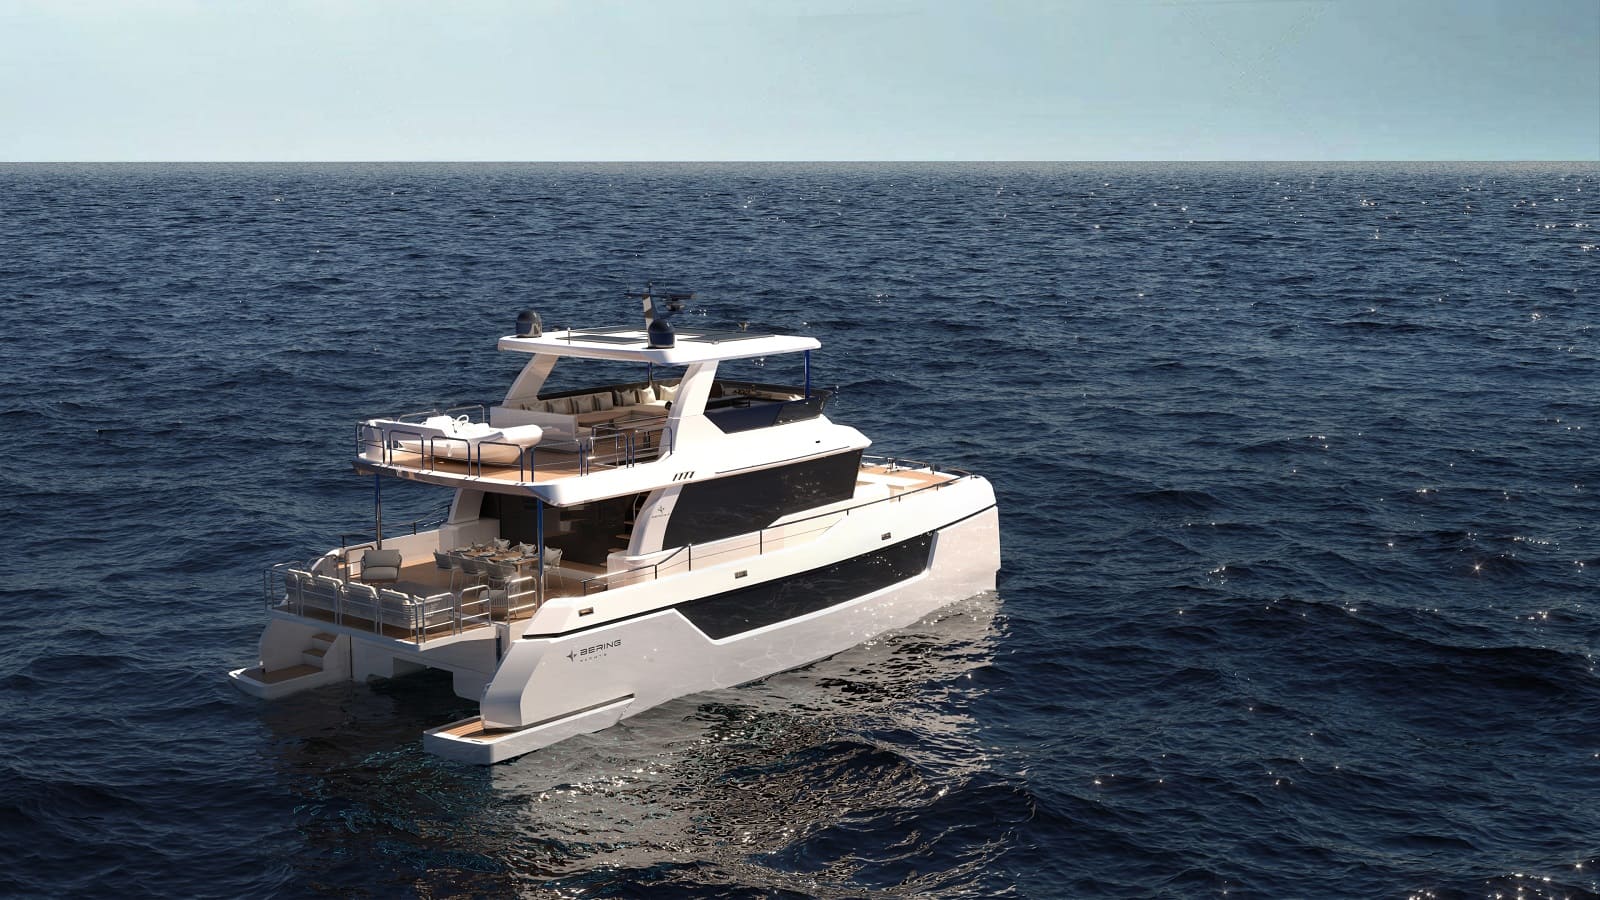 Bering Yachts Runs a New Adventure with Bering 60 CAT